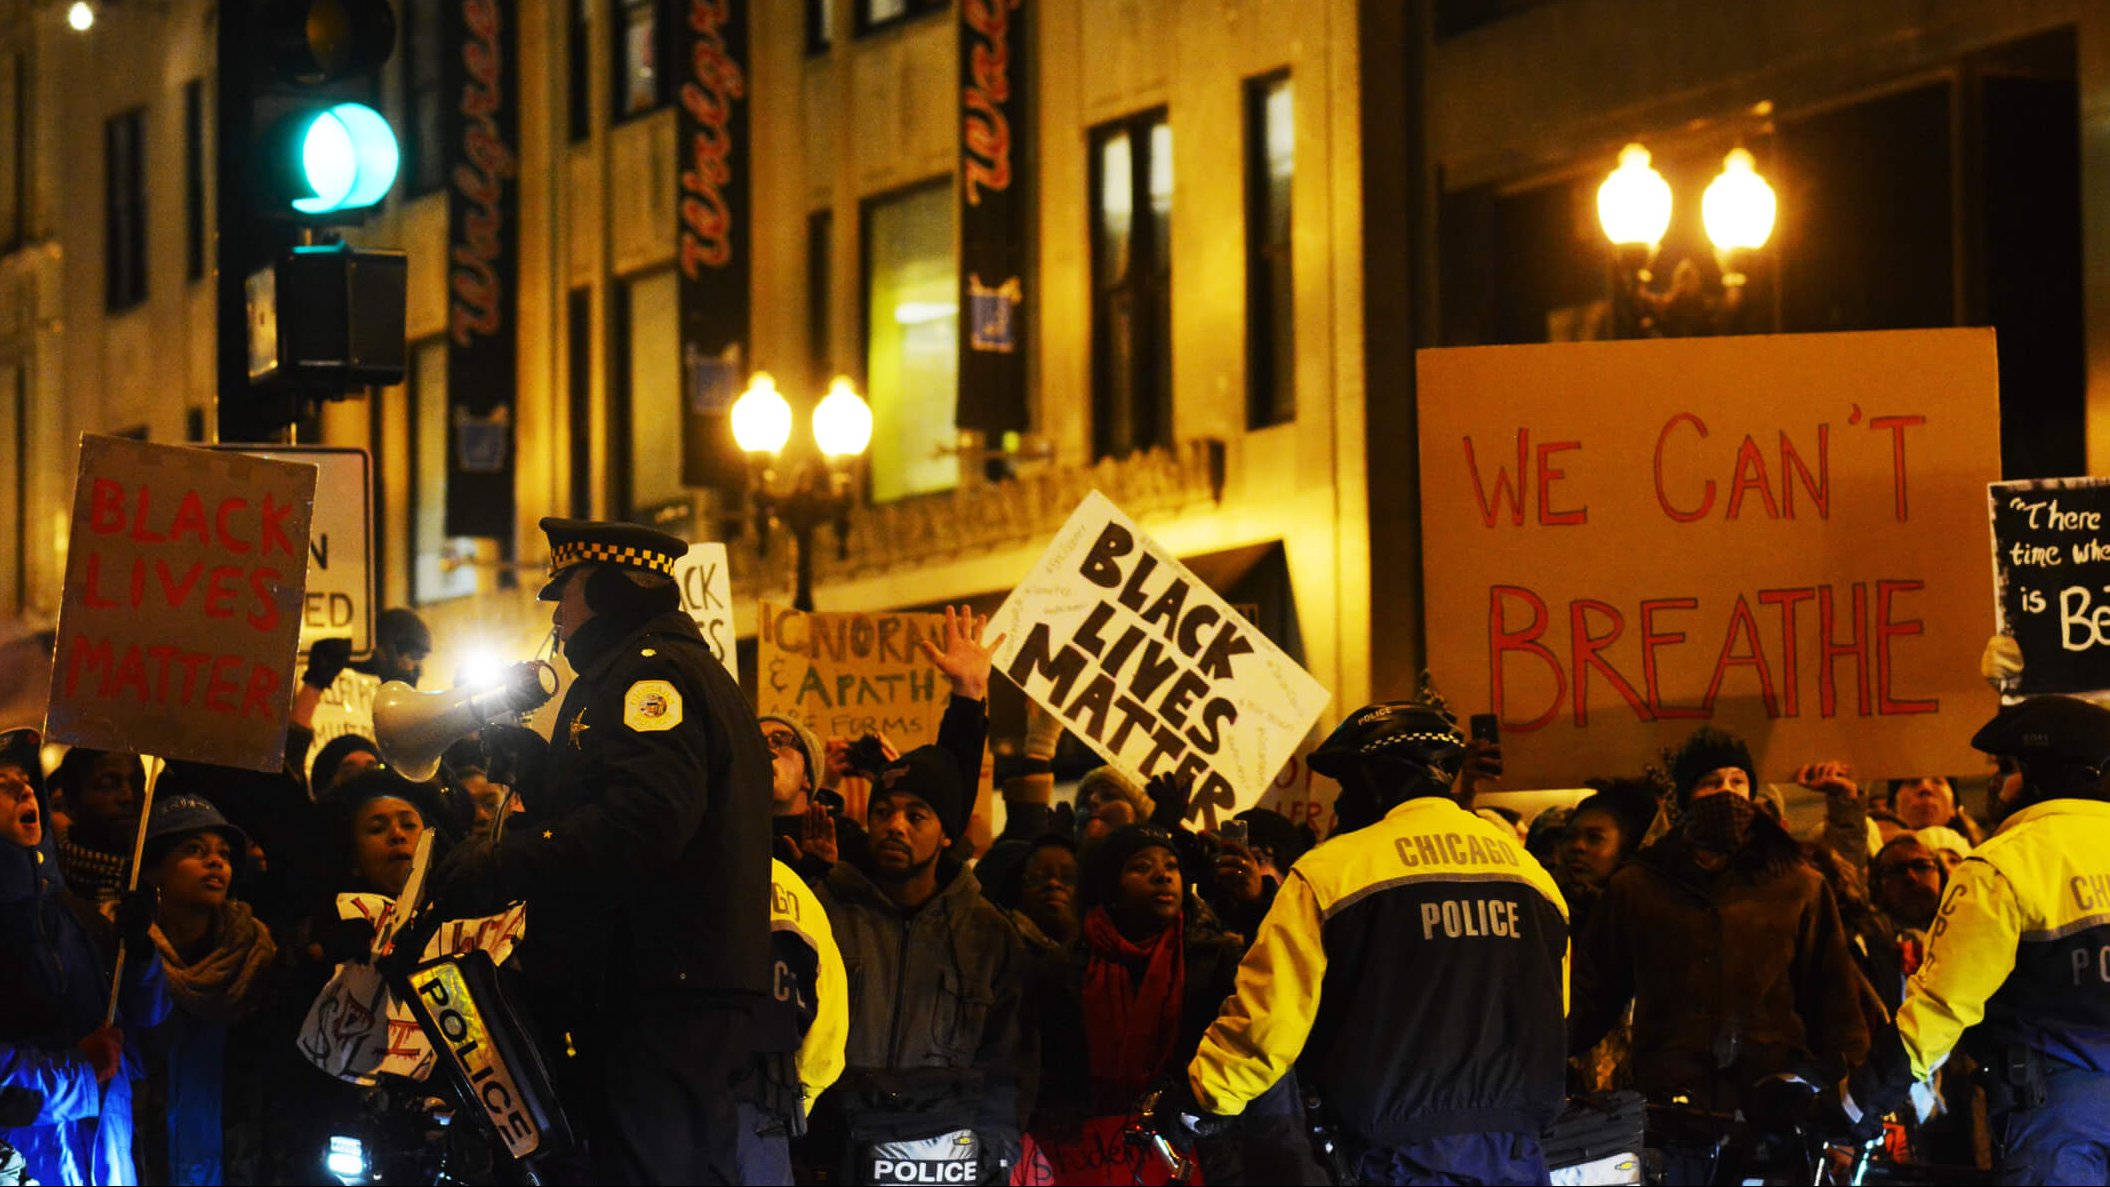 People protest police brutality against African Americans.